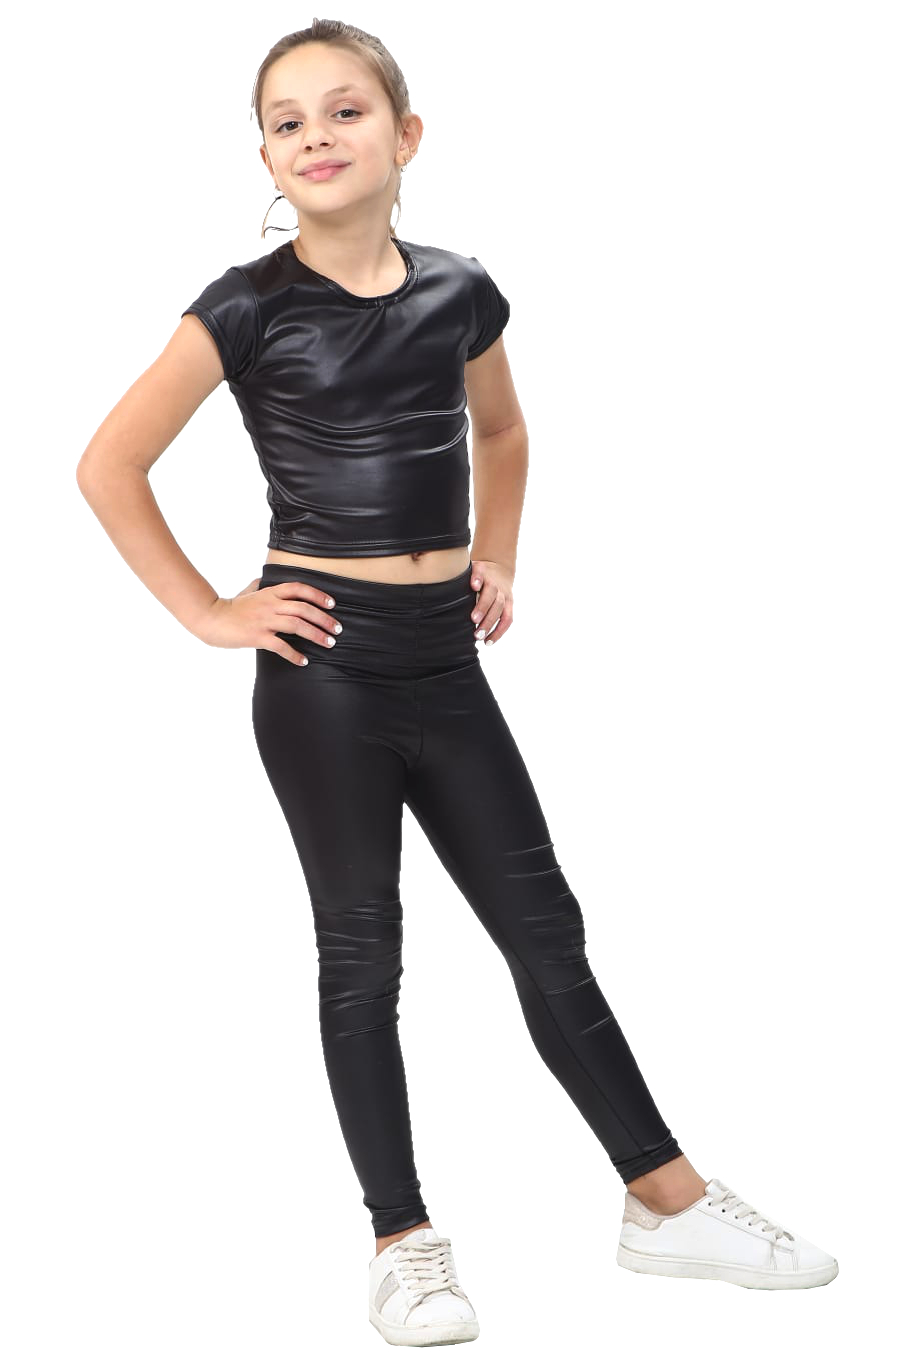 Girls Wet Look Outfit Crop Top And Leggings New Metallic Black Shiny Stretch Set Ebay